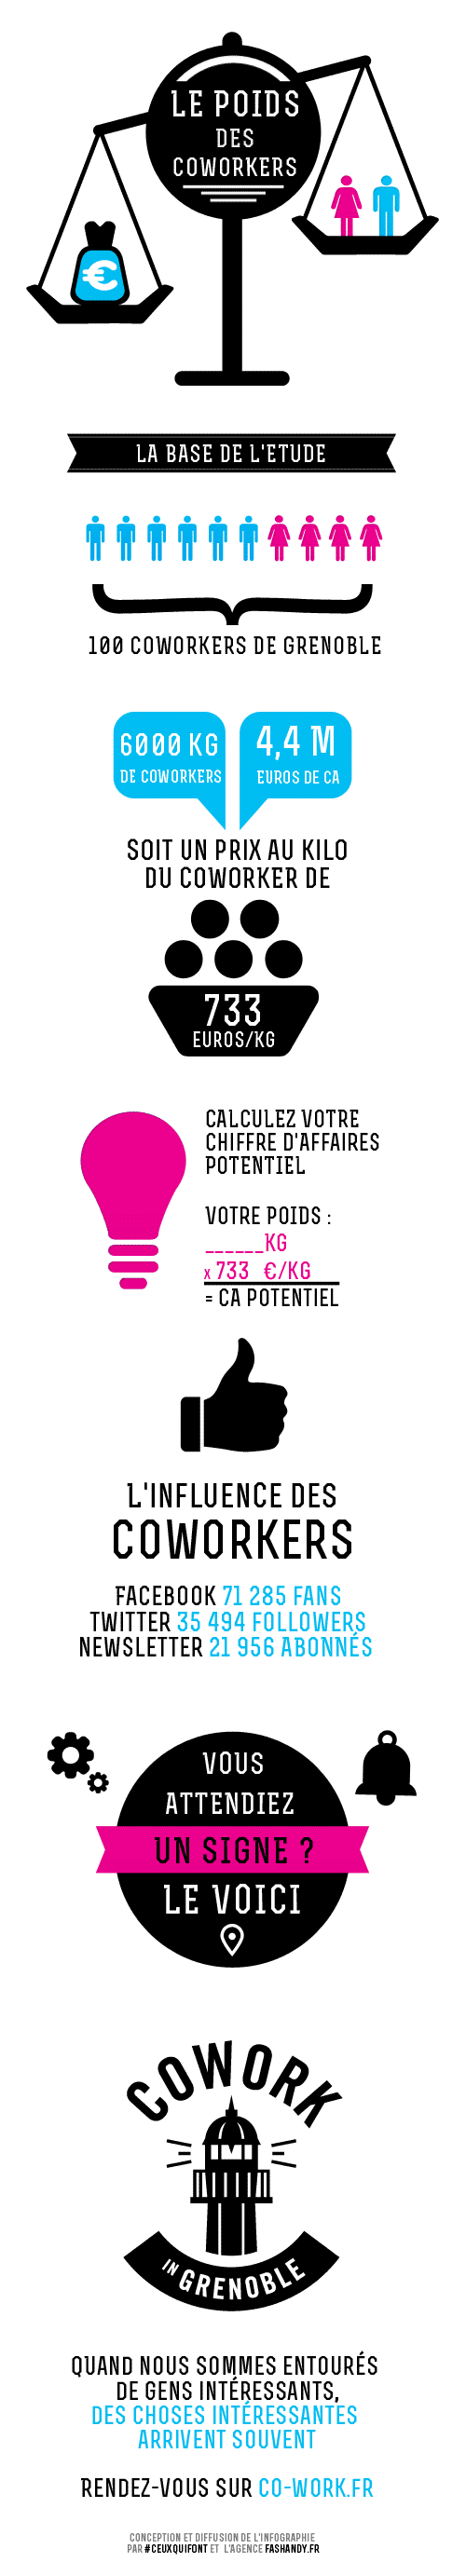 infographie-cowork